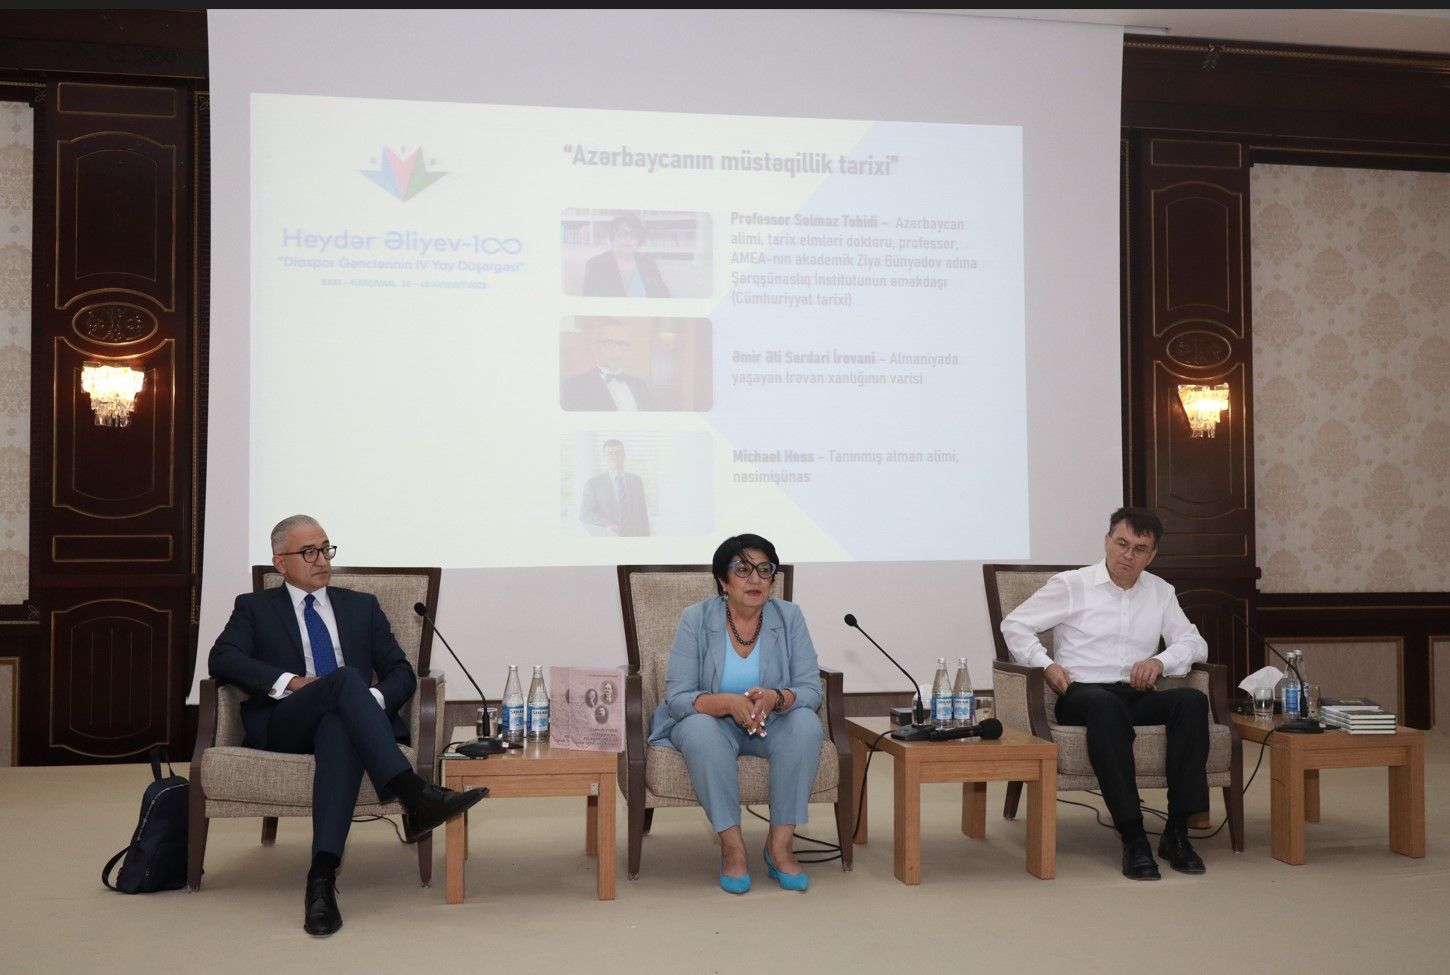 The next panel discussions of the Fourth Summer Camp was dedicated to the "History of Azerbaijan's independence" 